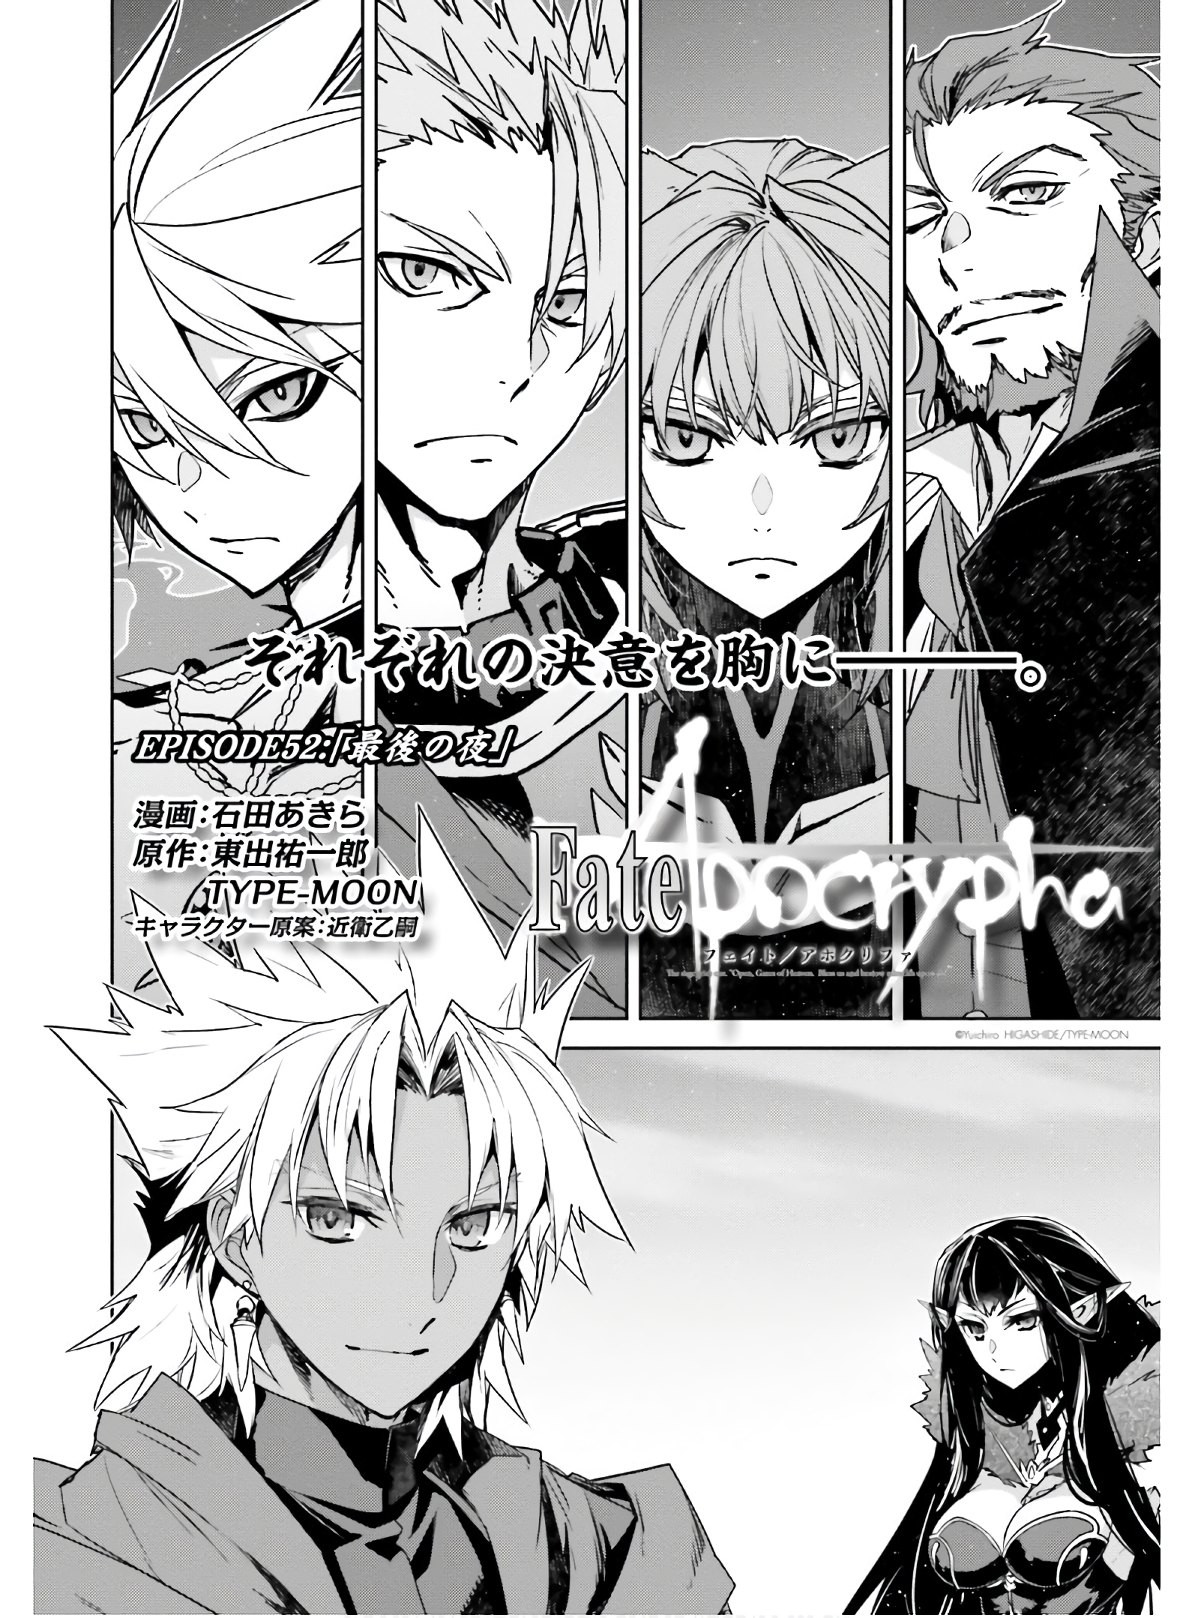 Fate-Apocrypha - Chapter 52 - Page 2